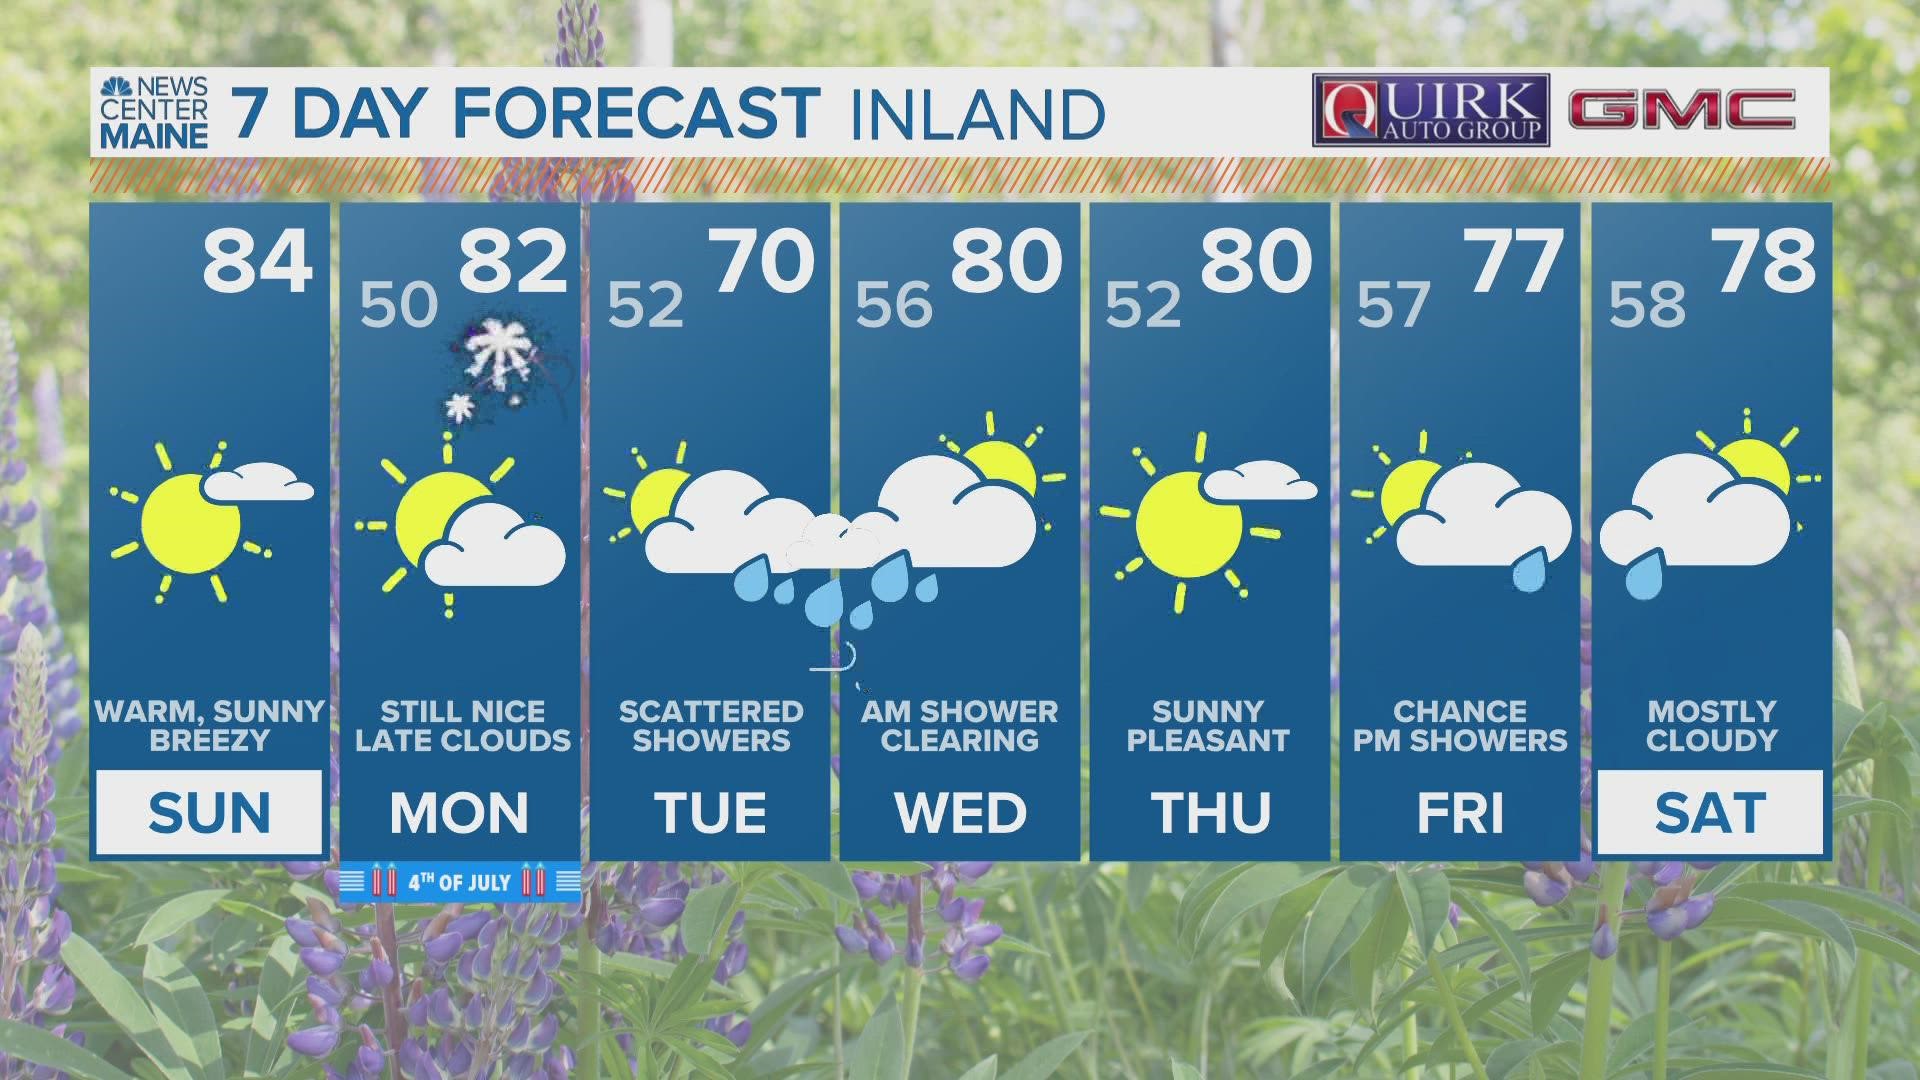 NEWS CENTER Maine Weather Video Forecast 07.03.22 Updated 7:30am